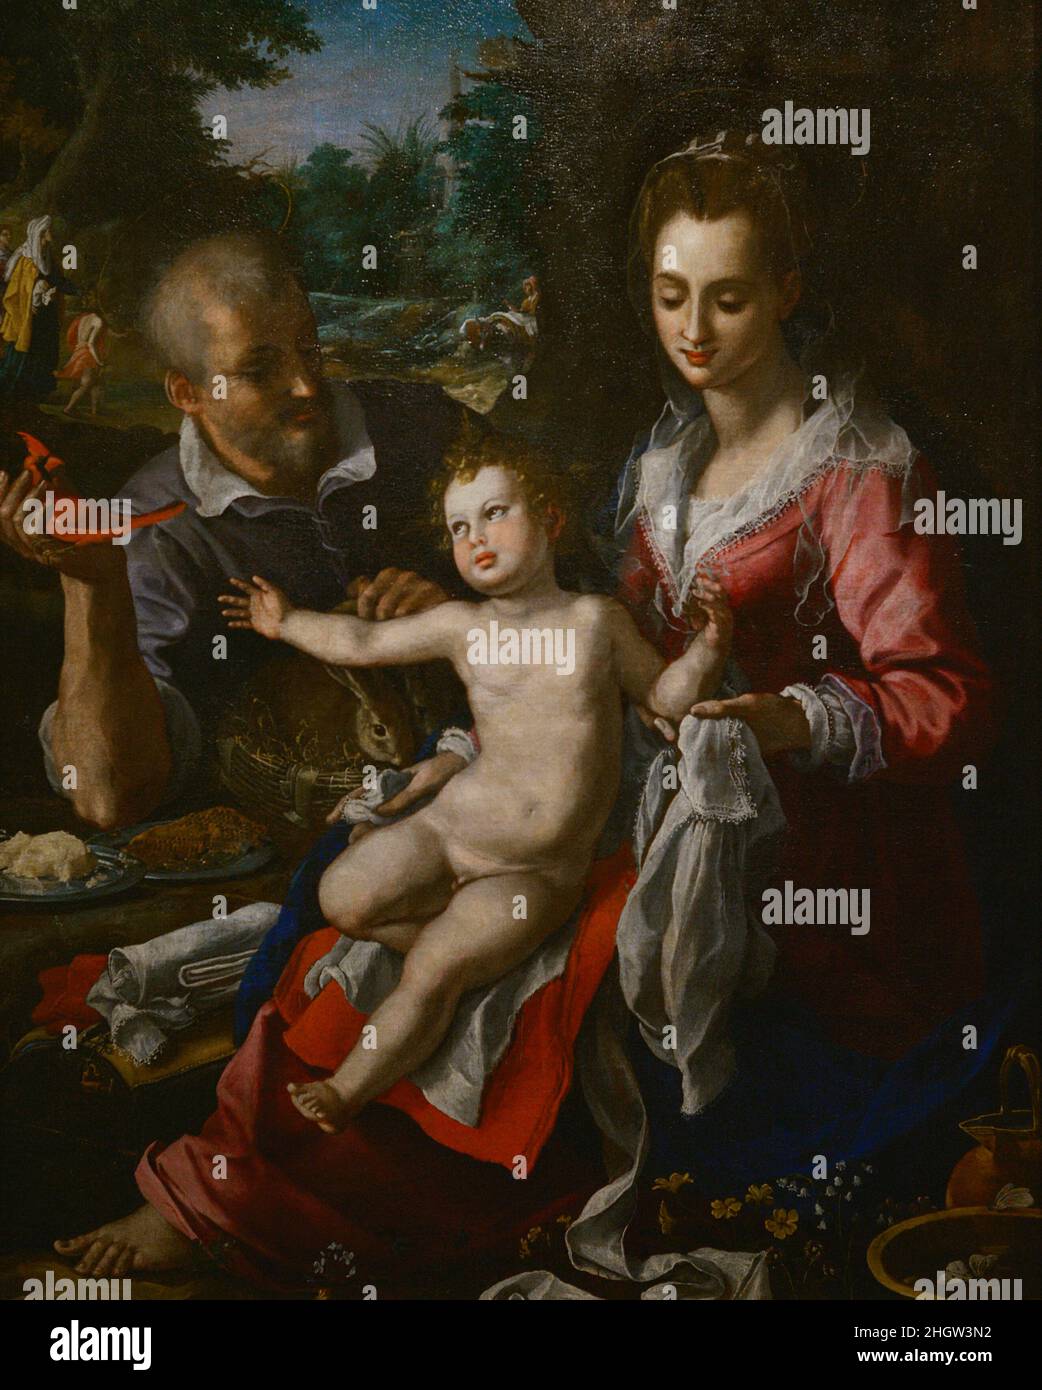 Alessandro Allori, called Alessandro Bronzino (1535-1607). Italian Mannerist painter. Holy Family. The Rest on the flight to Egypt, 1602. From the Church of Santo André and Santa Marinha (Graça), Lisbon (Portugal). National Museum of Ancient Art. Lisbon, Portugal. Stock Photo